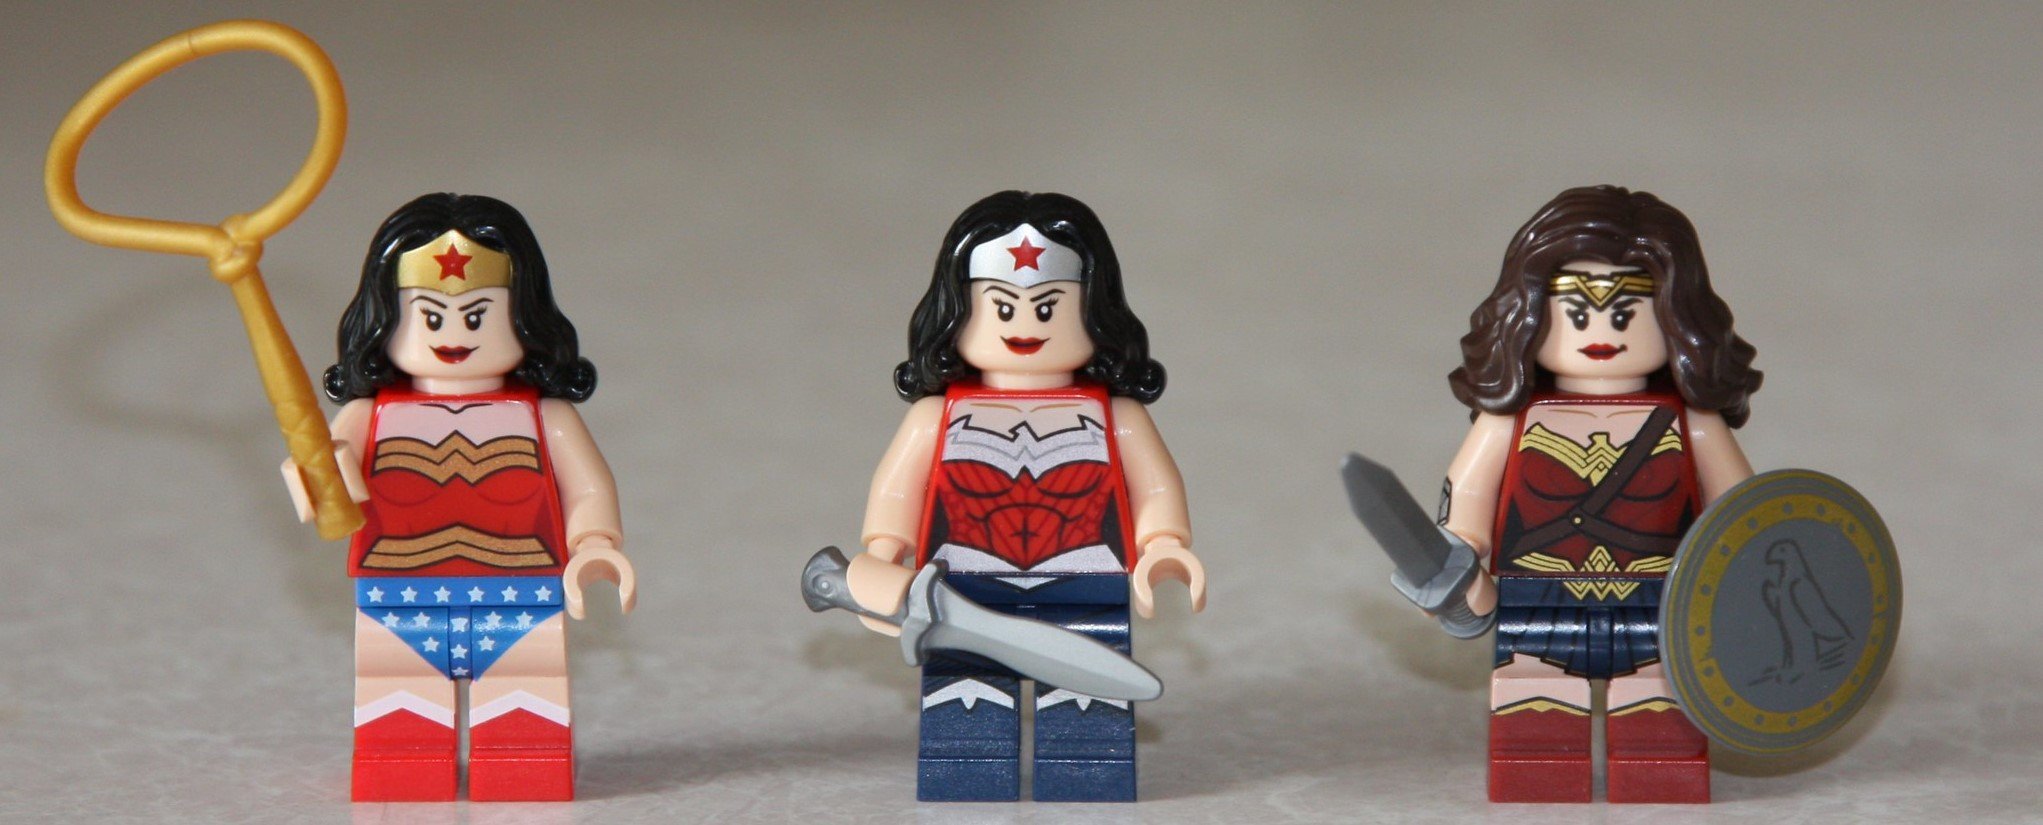 No matter which version of wonder woman it is, she always knows the fastest way to build muscle (fight for justice).